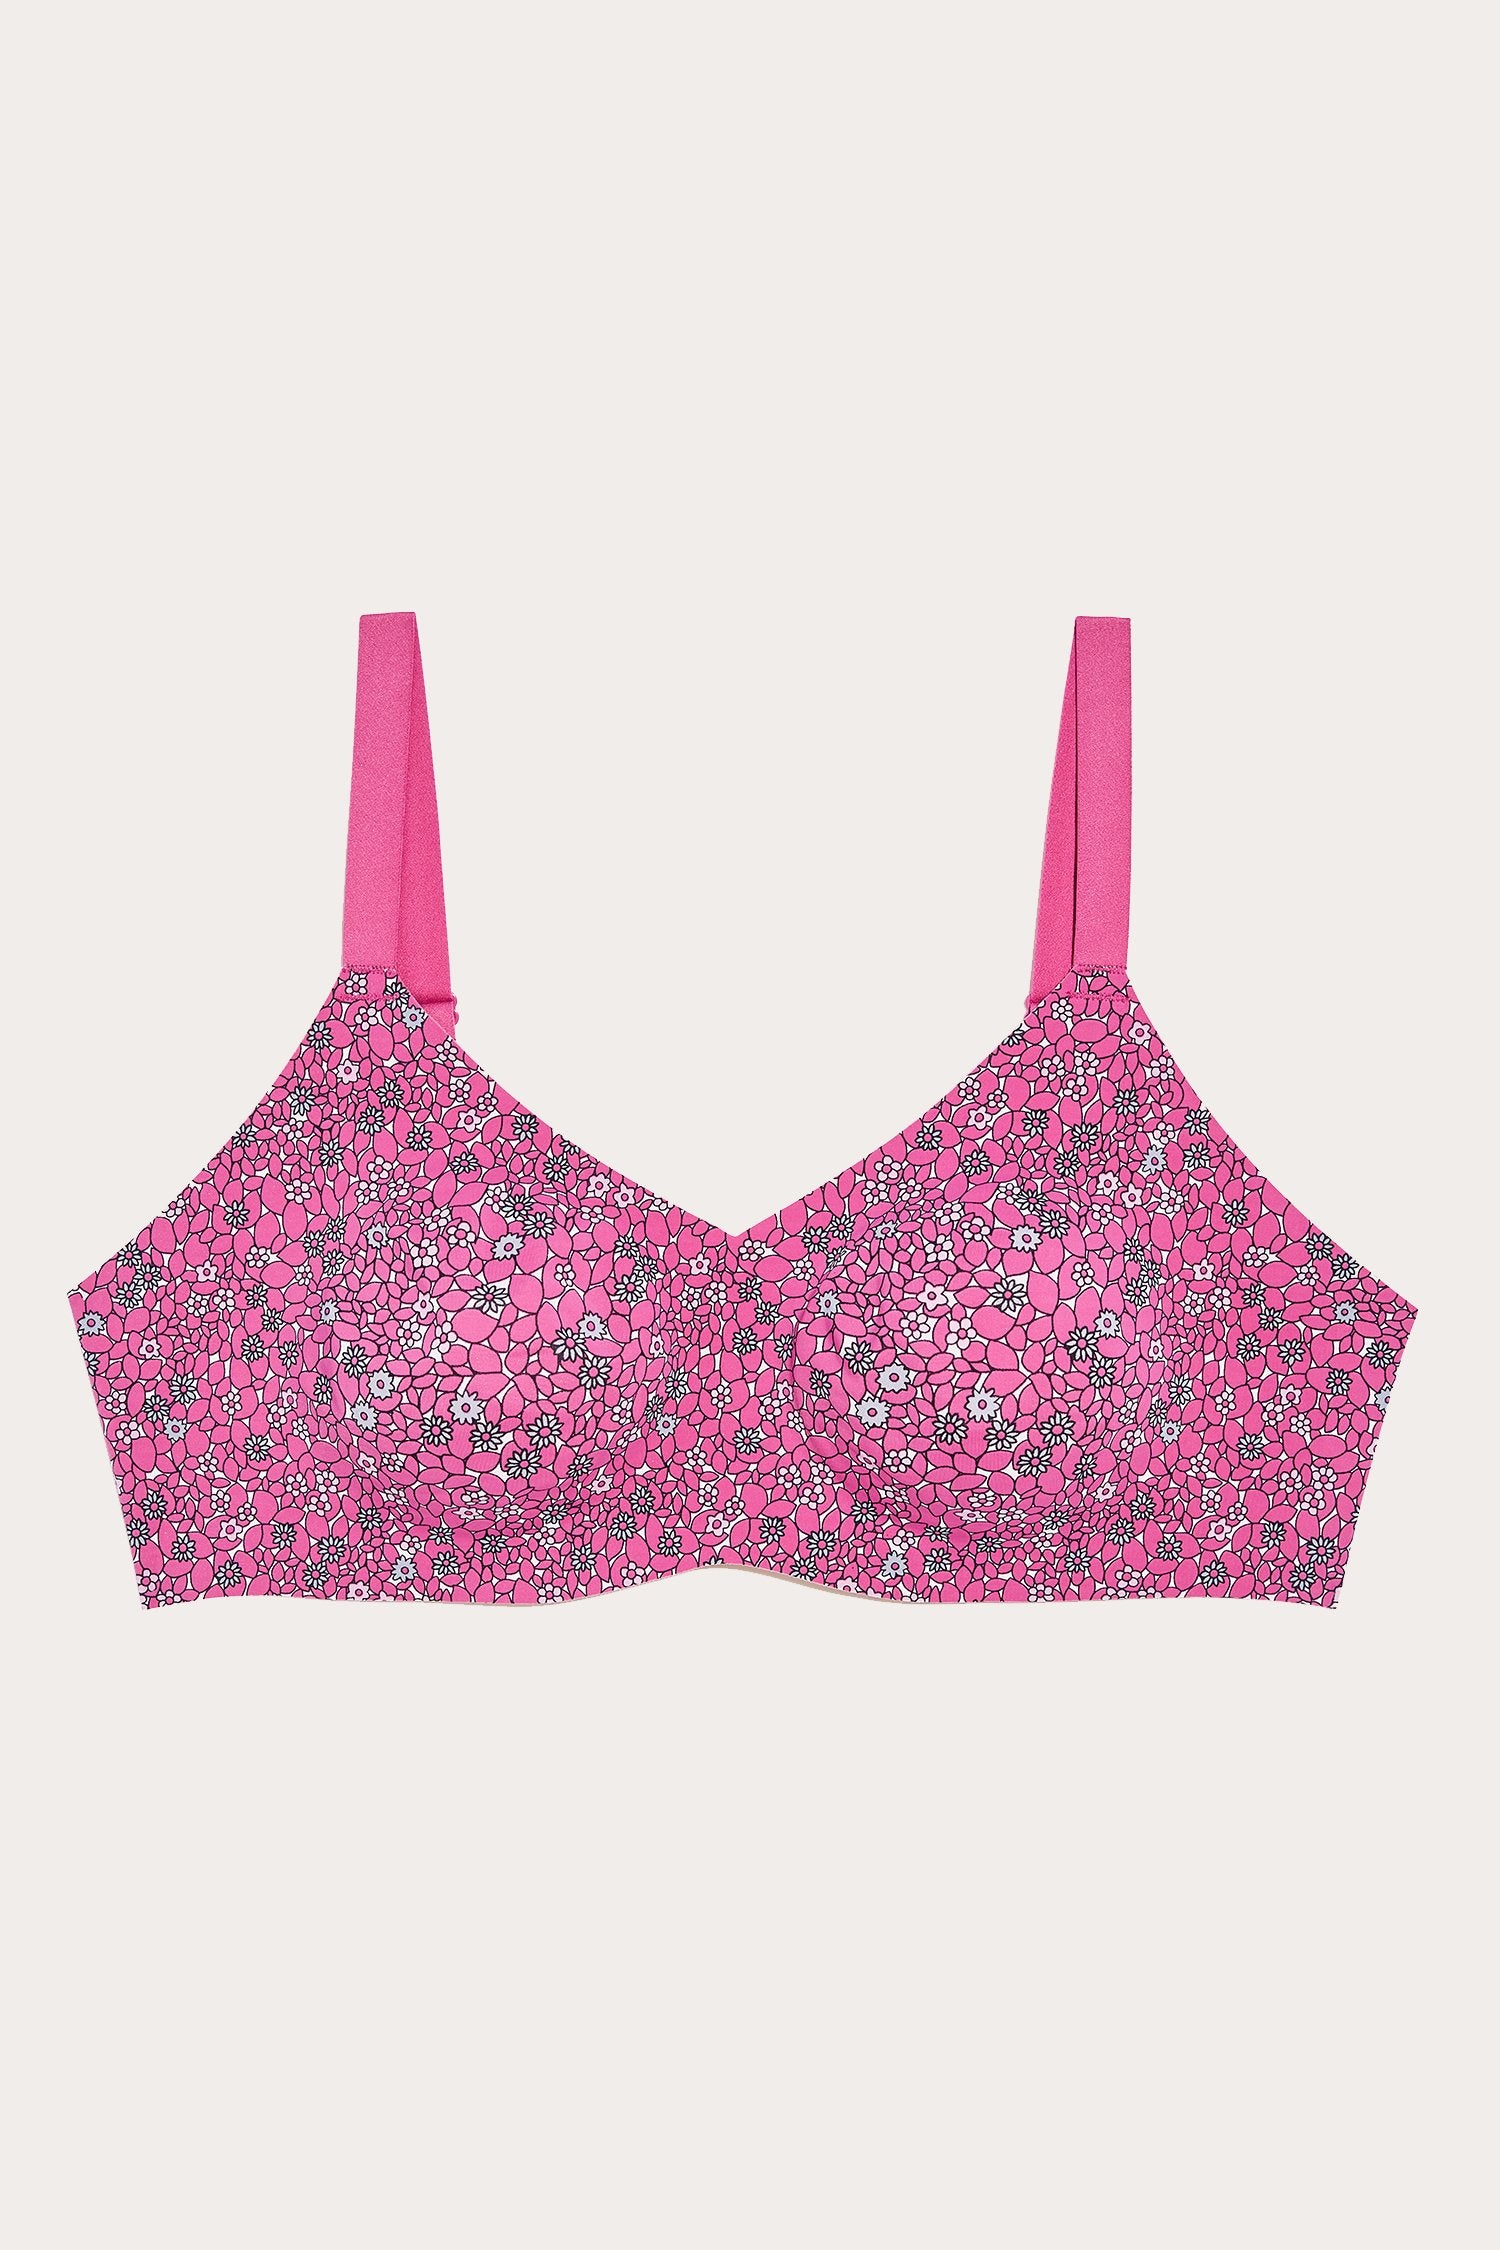 Anna Sui Posey V-Neck Padded Bra inspired by the Arts and Crafts movement and Scandinavian designs from the sixties